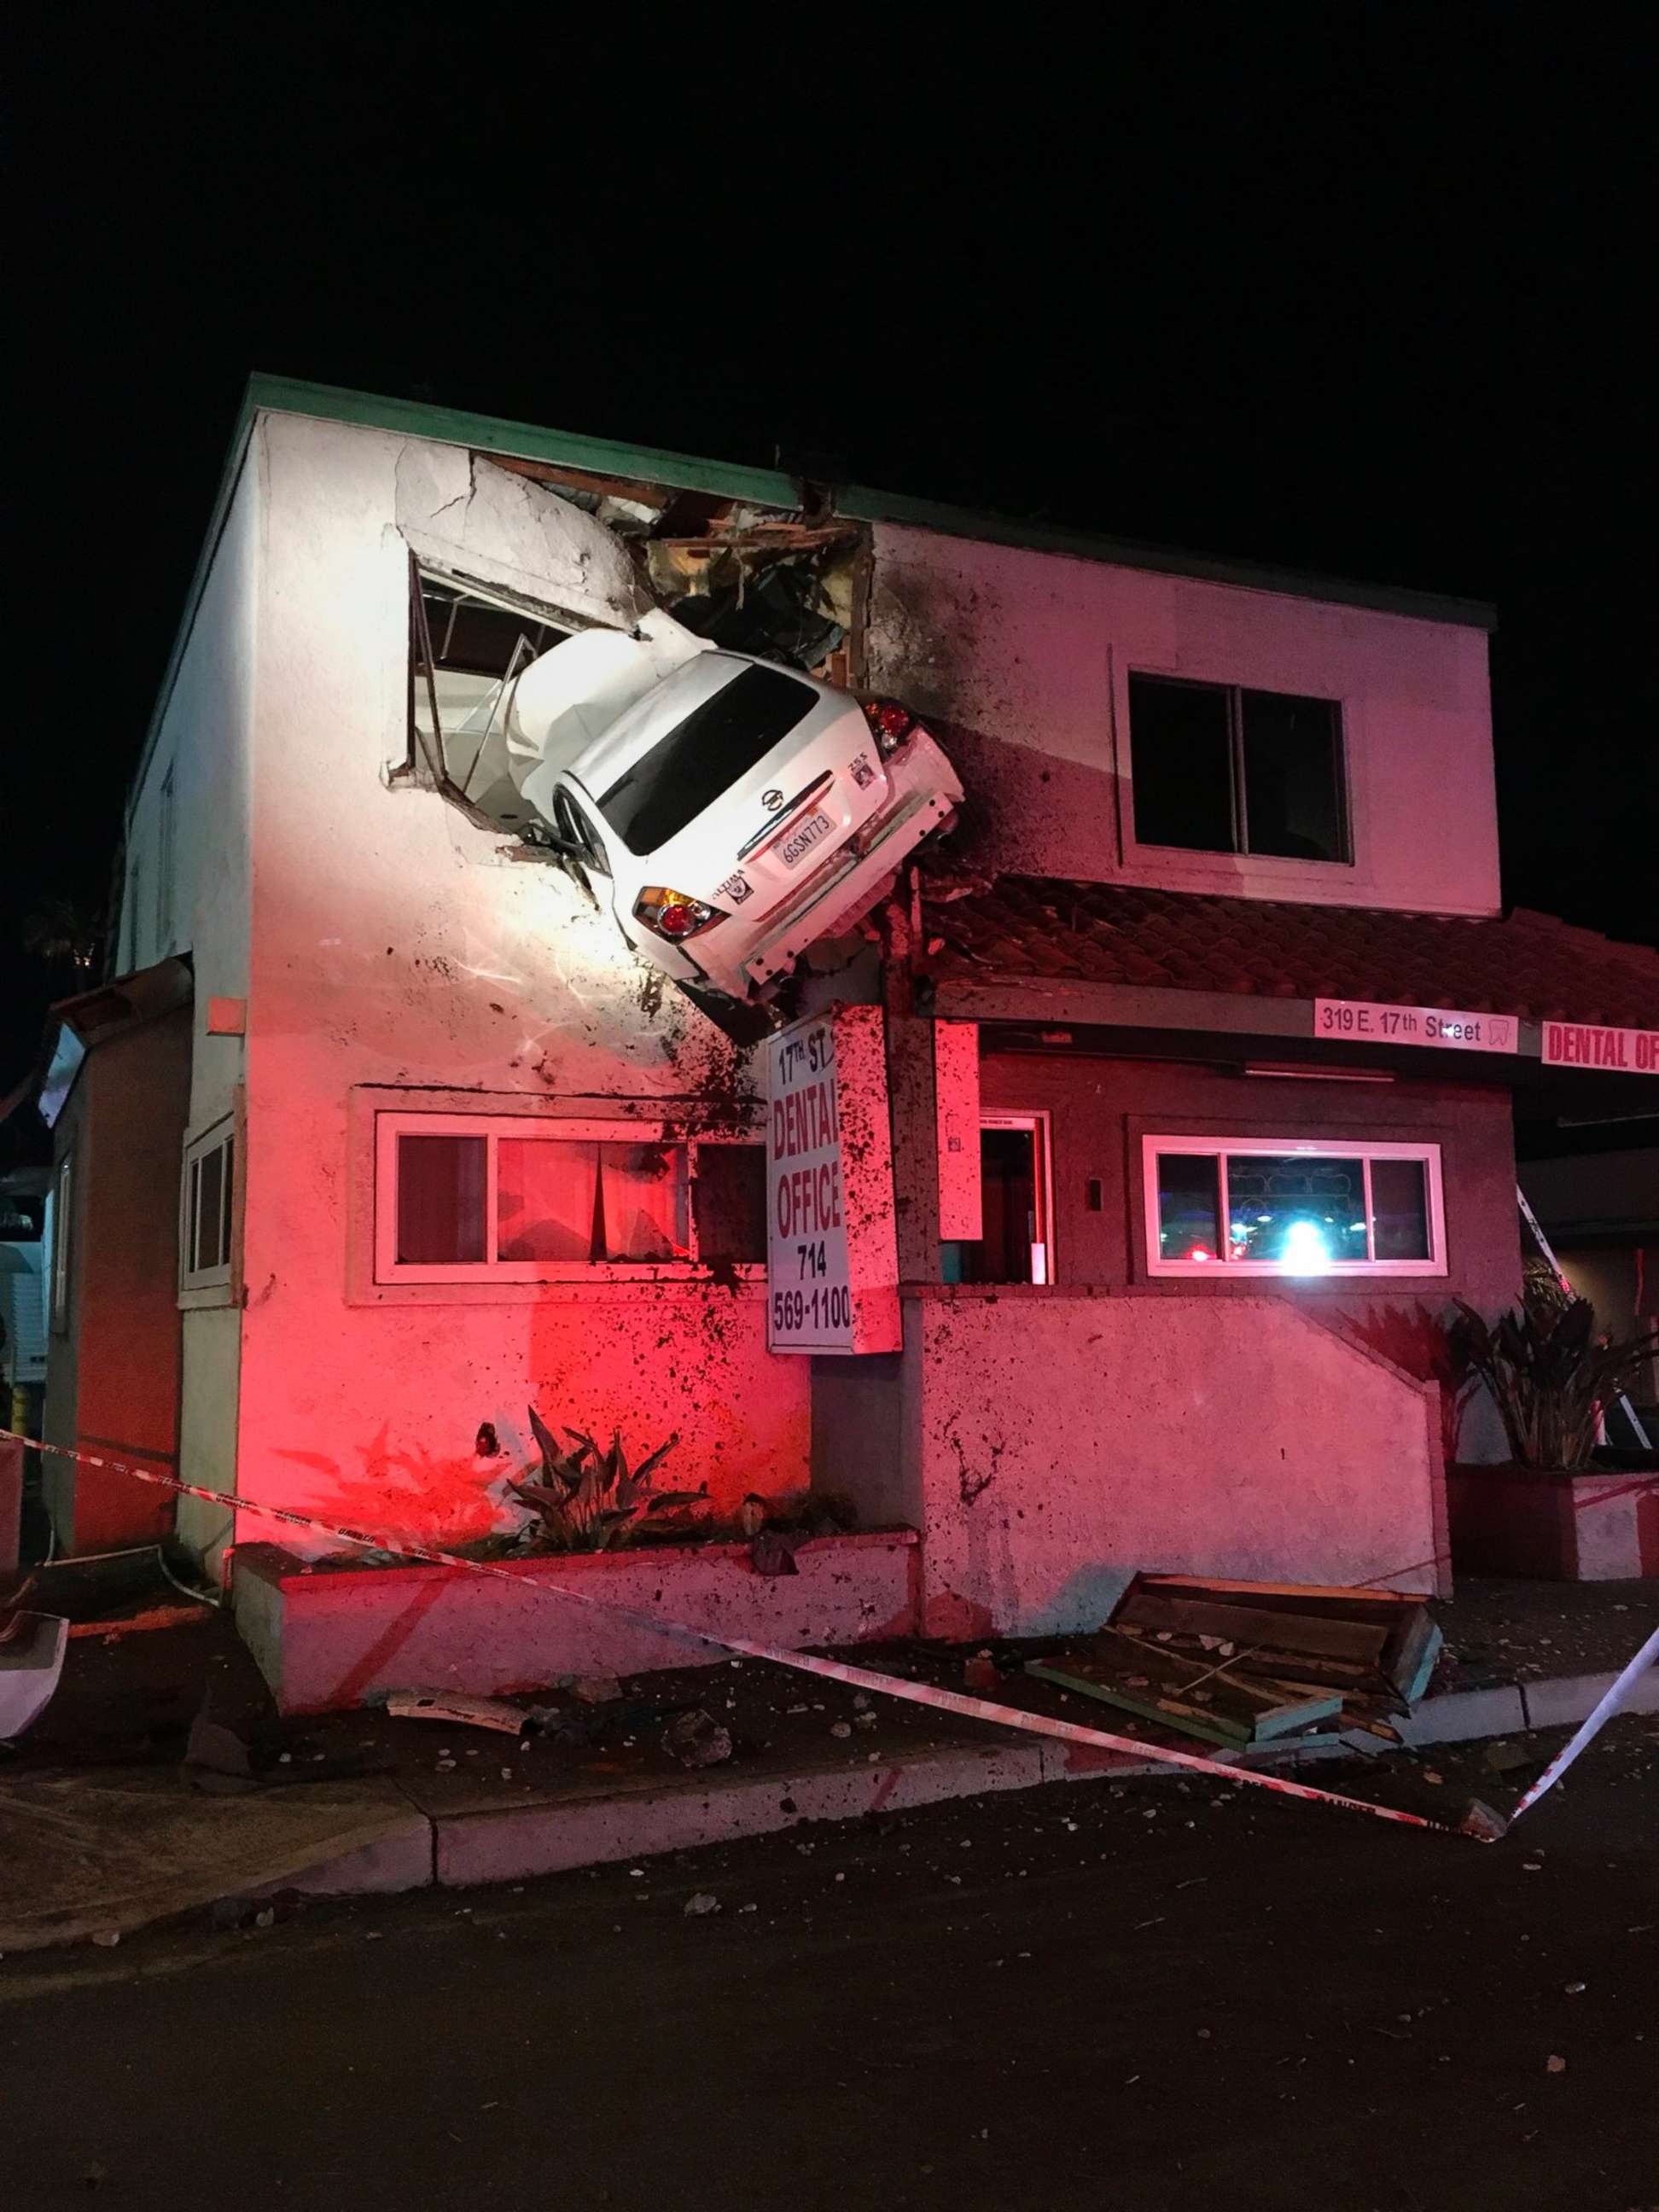 PHOTO: A vehicle that crashed into a building hangs from a second story window in Santa Ana, Calif., Kam/ 14. 2018. Two people escaped serious injuries when the car hit a divider, went airborne and slammed into the second floor of a dental office.